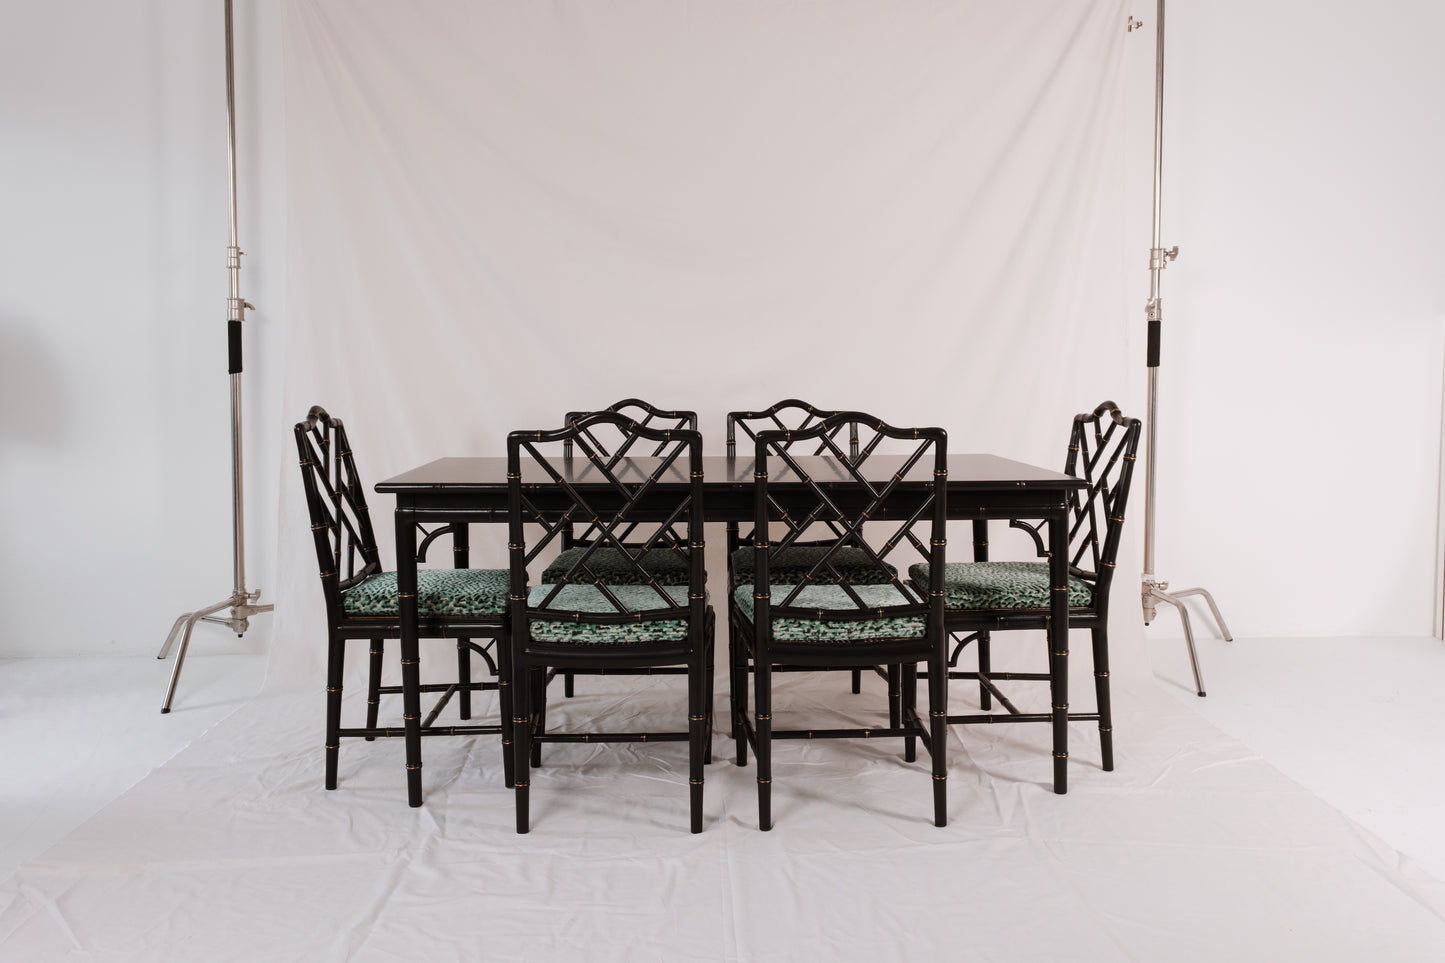 1970's Vintage Faux Bamboo Dining Table & 6 Chair Set